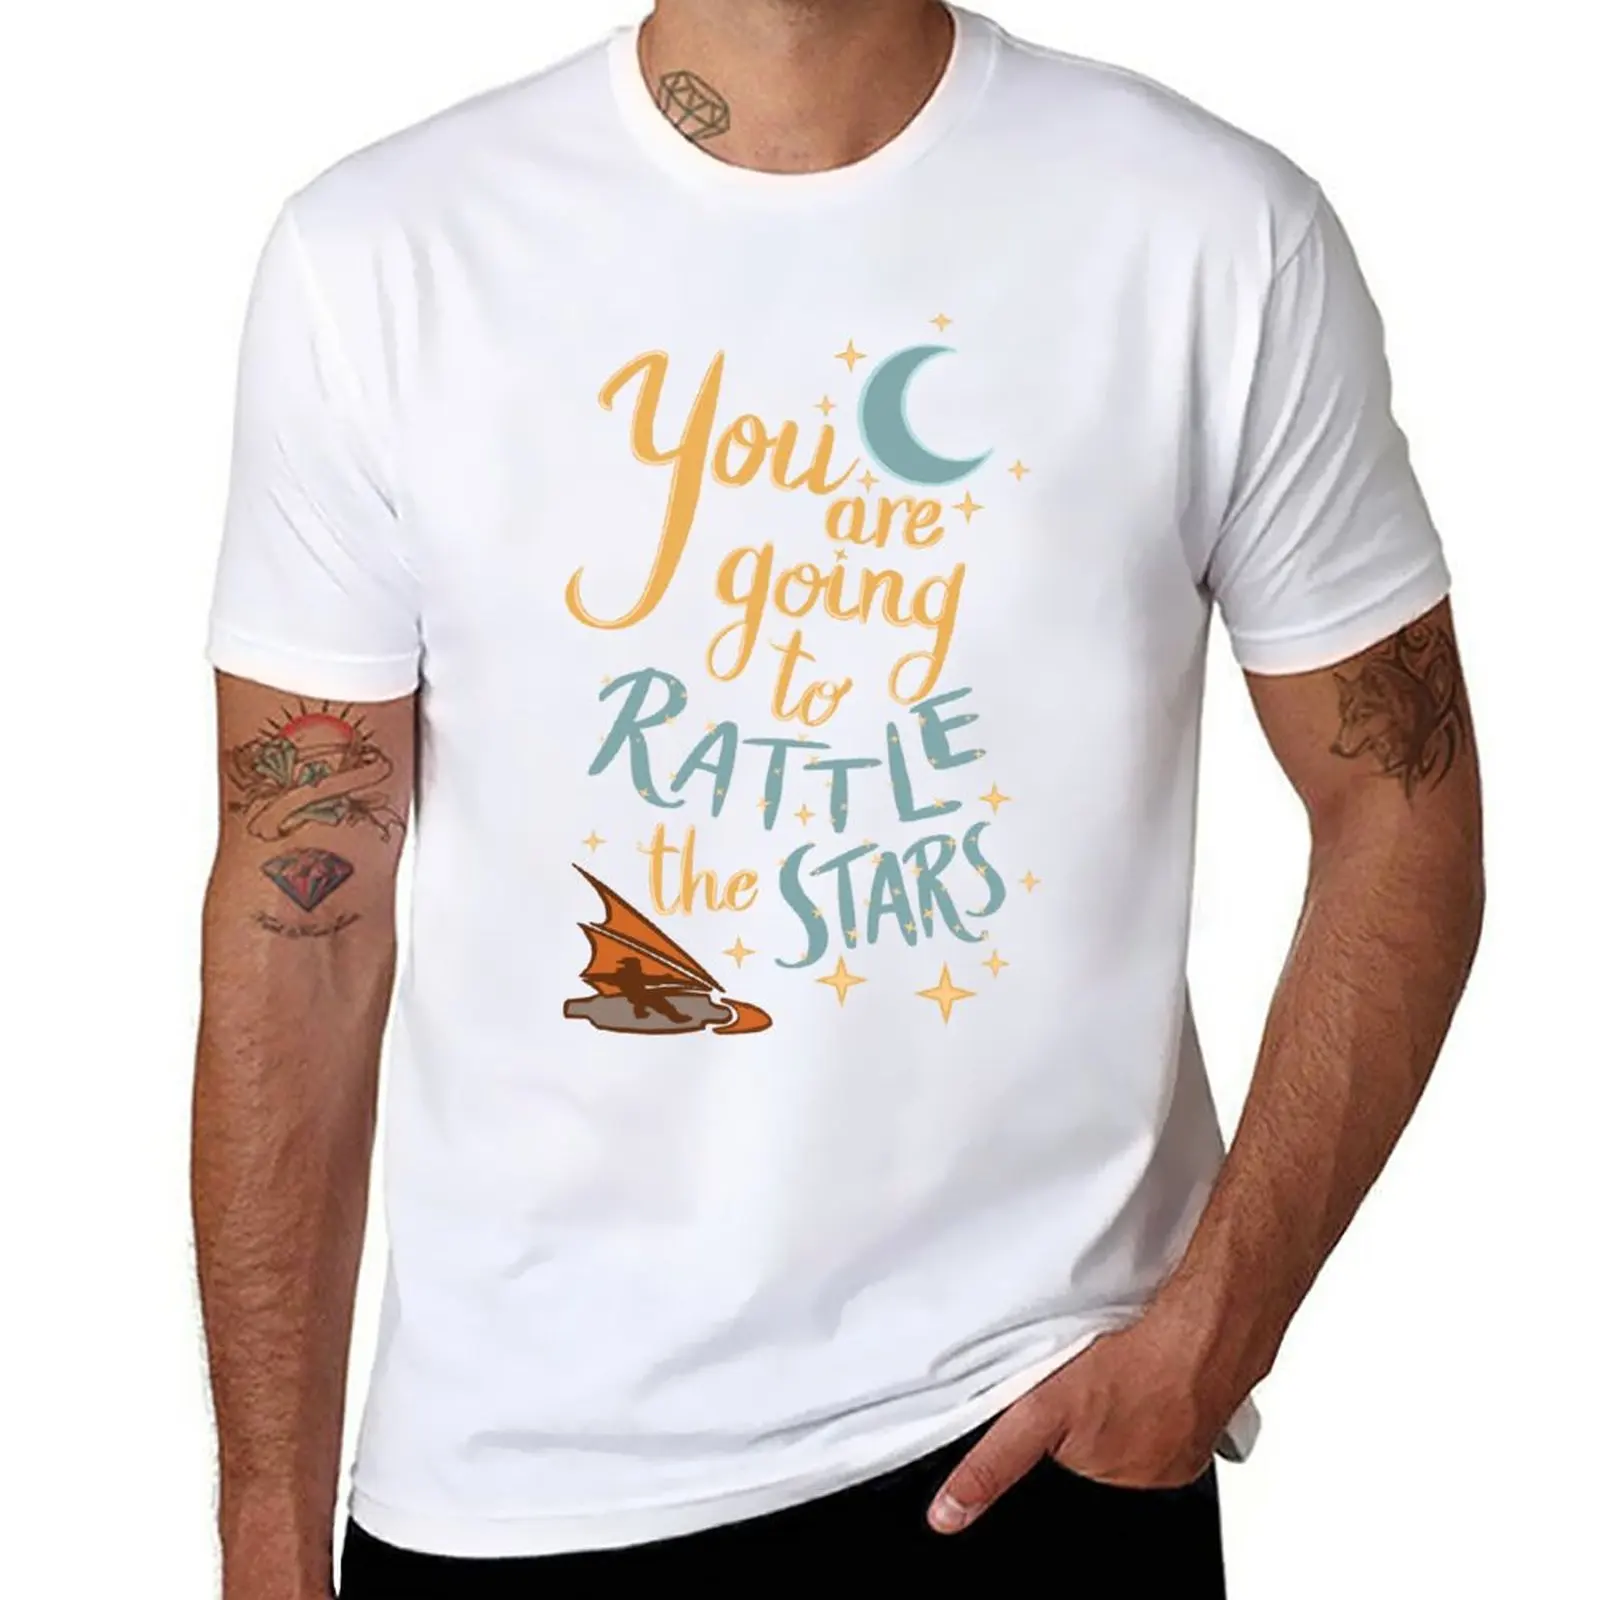 

New You are going to rattle the stars! T-Shirt vintage t shirt shirts graphic tees slim fit t shirts for men